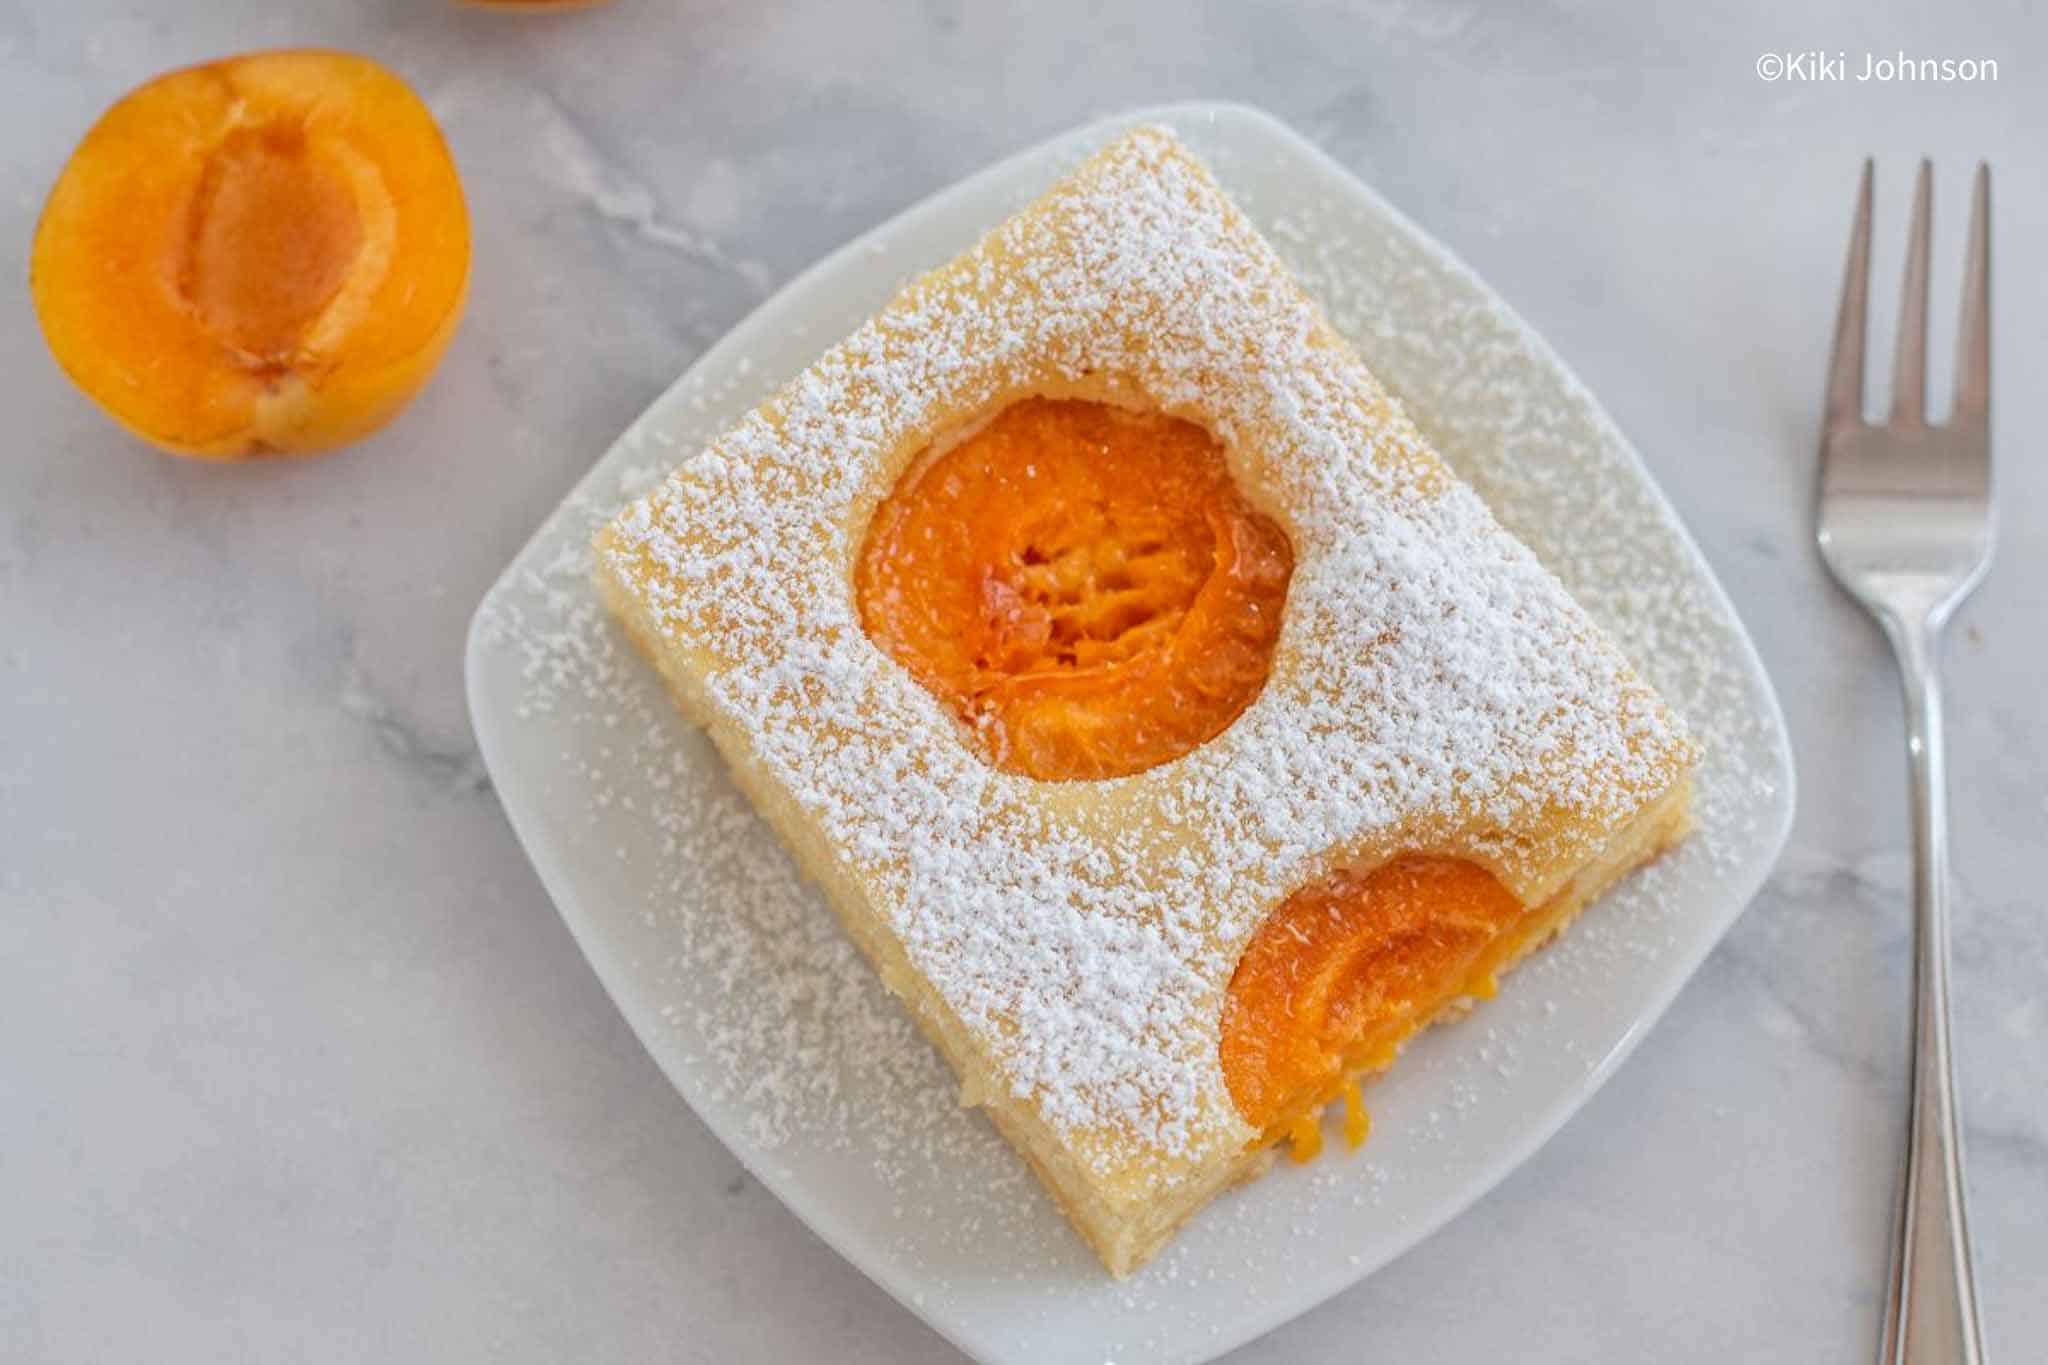 a slice of apricot sponge cake with fresh apricot halves on the side.